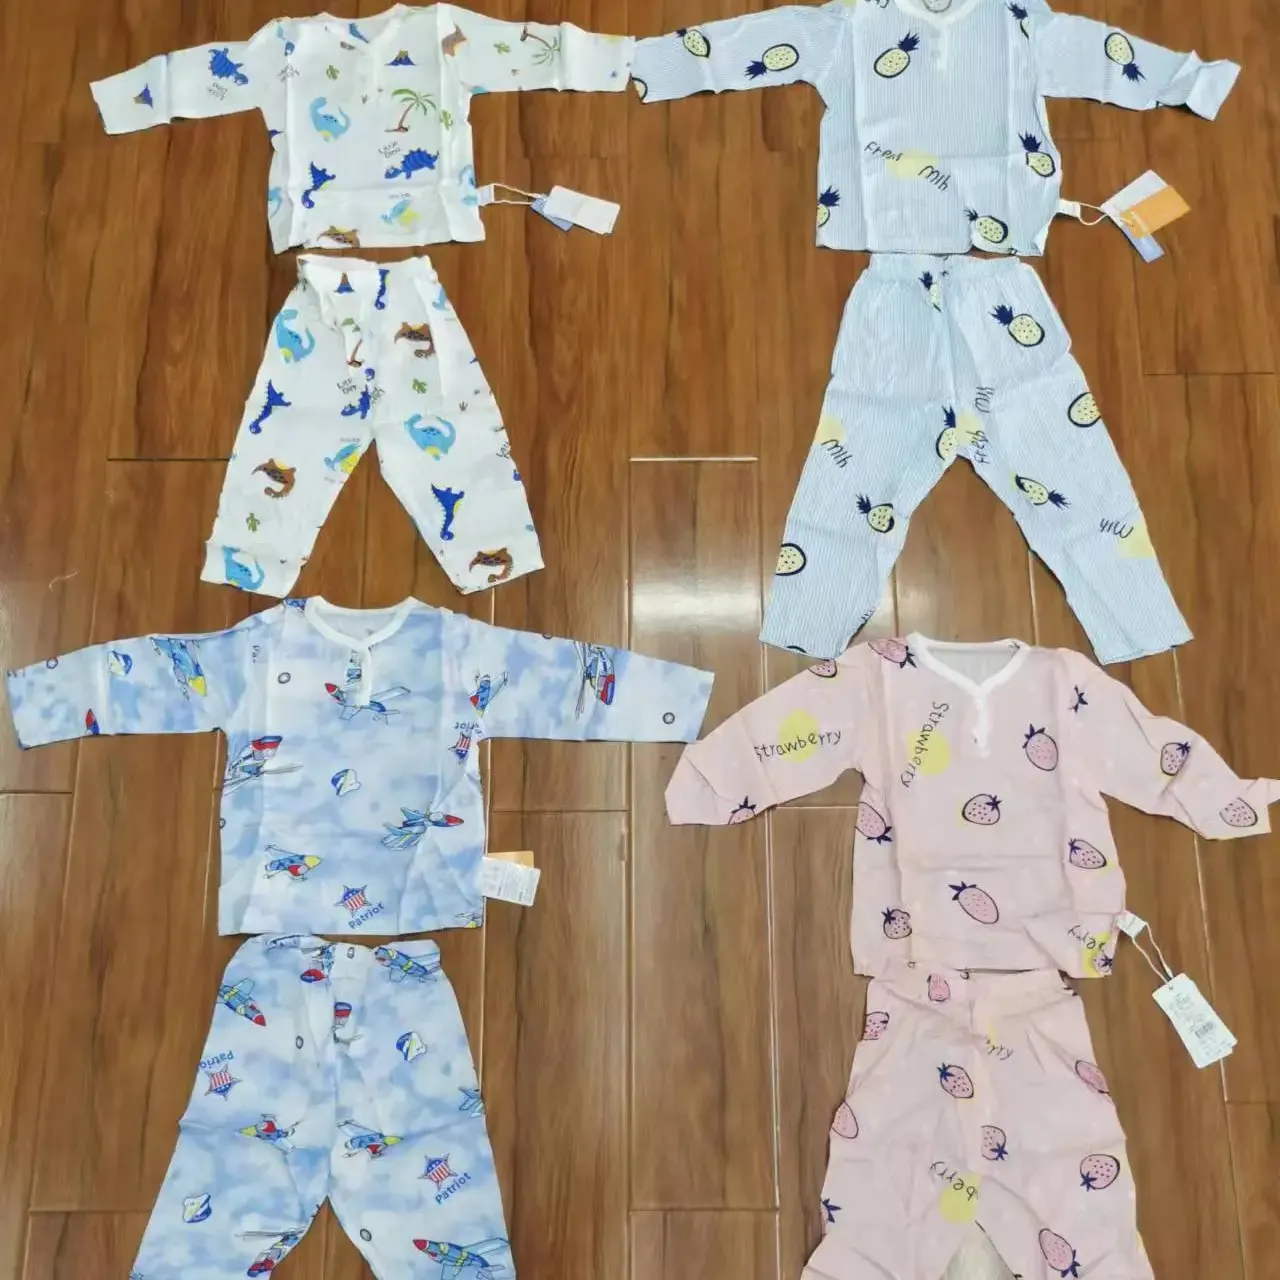 Newborn Baby Pajamas clothing sets baby Summer Short Sleeve Tops Boys Girls Outfits 2 Pieces overstock assorted leftover surplus